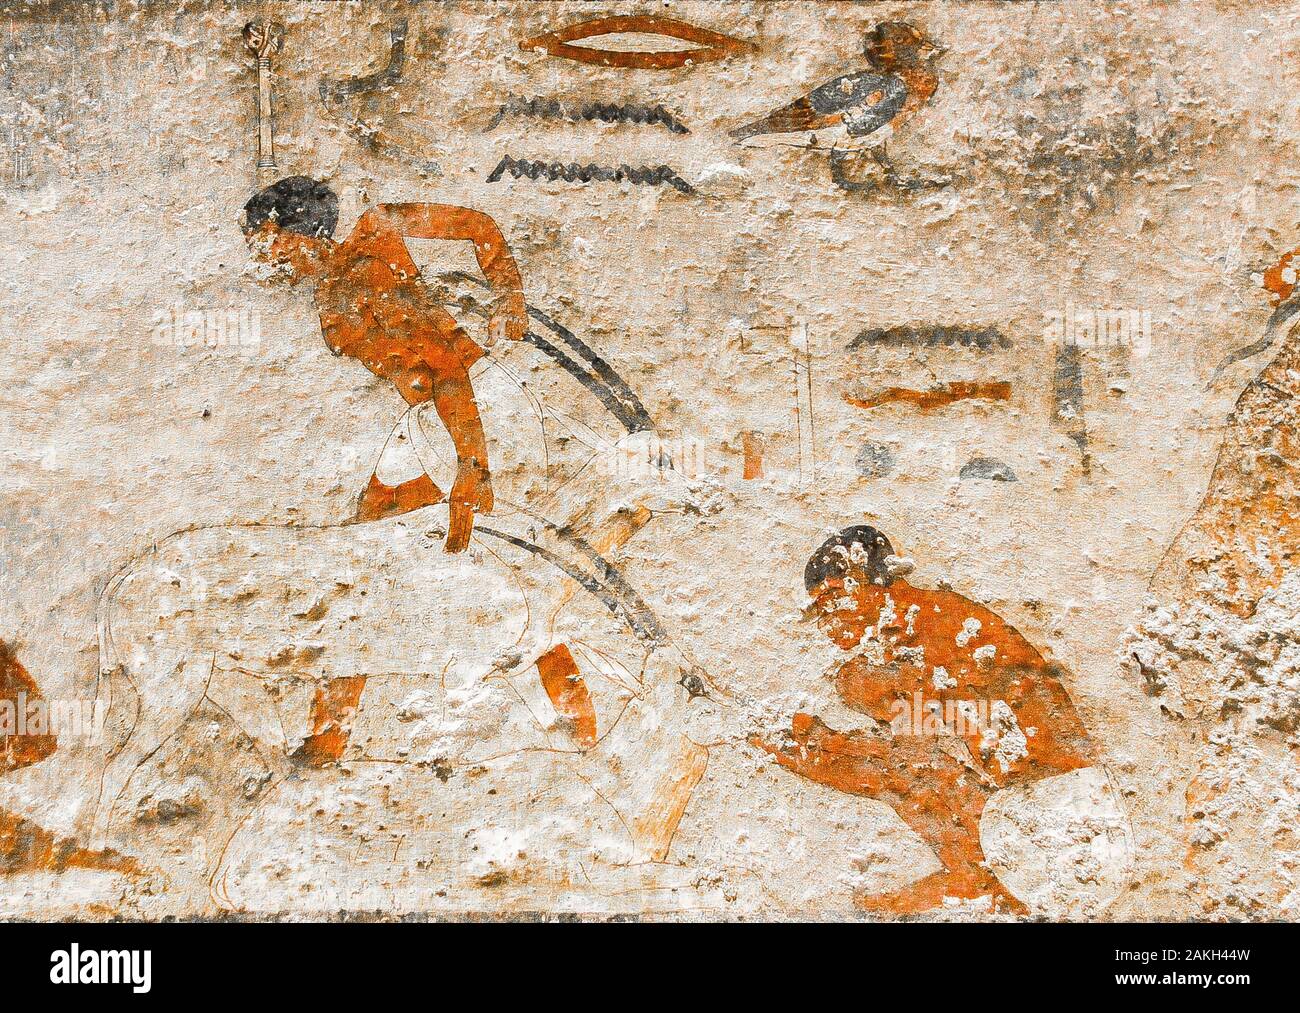 Middle Egypt, Beni Hasan, the tomb of Khnumhotep II dates from the Middle Kingdom. Feeding of gazelles. The movement of one of the men is noticeable, Stock Photo